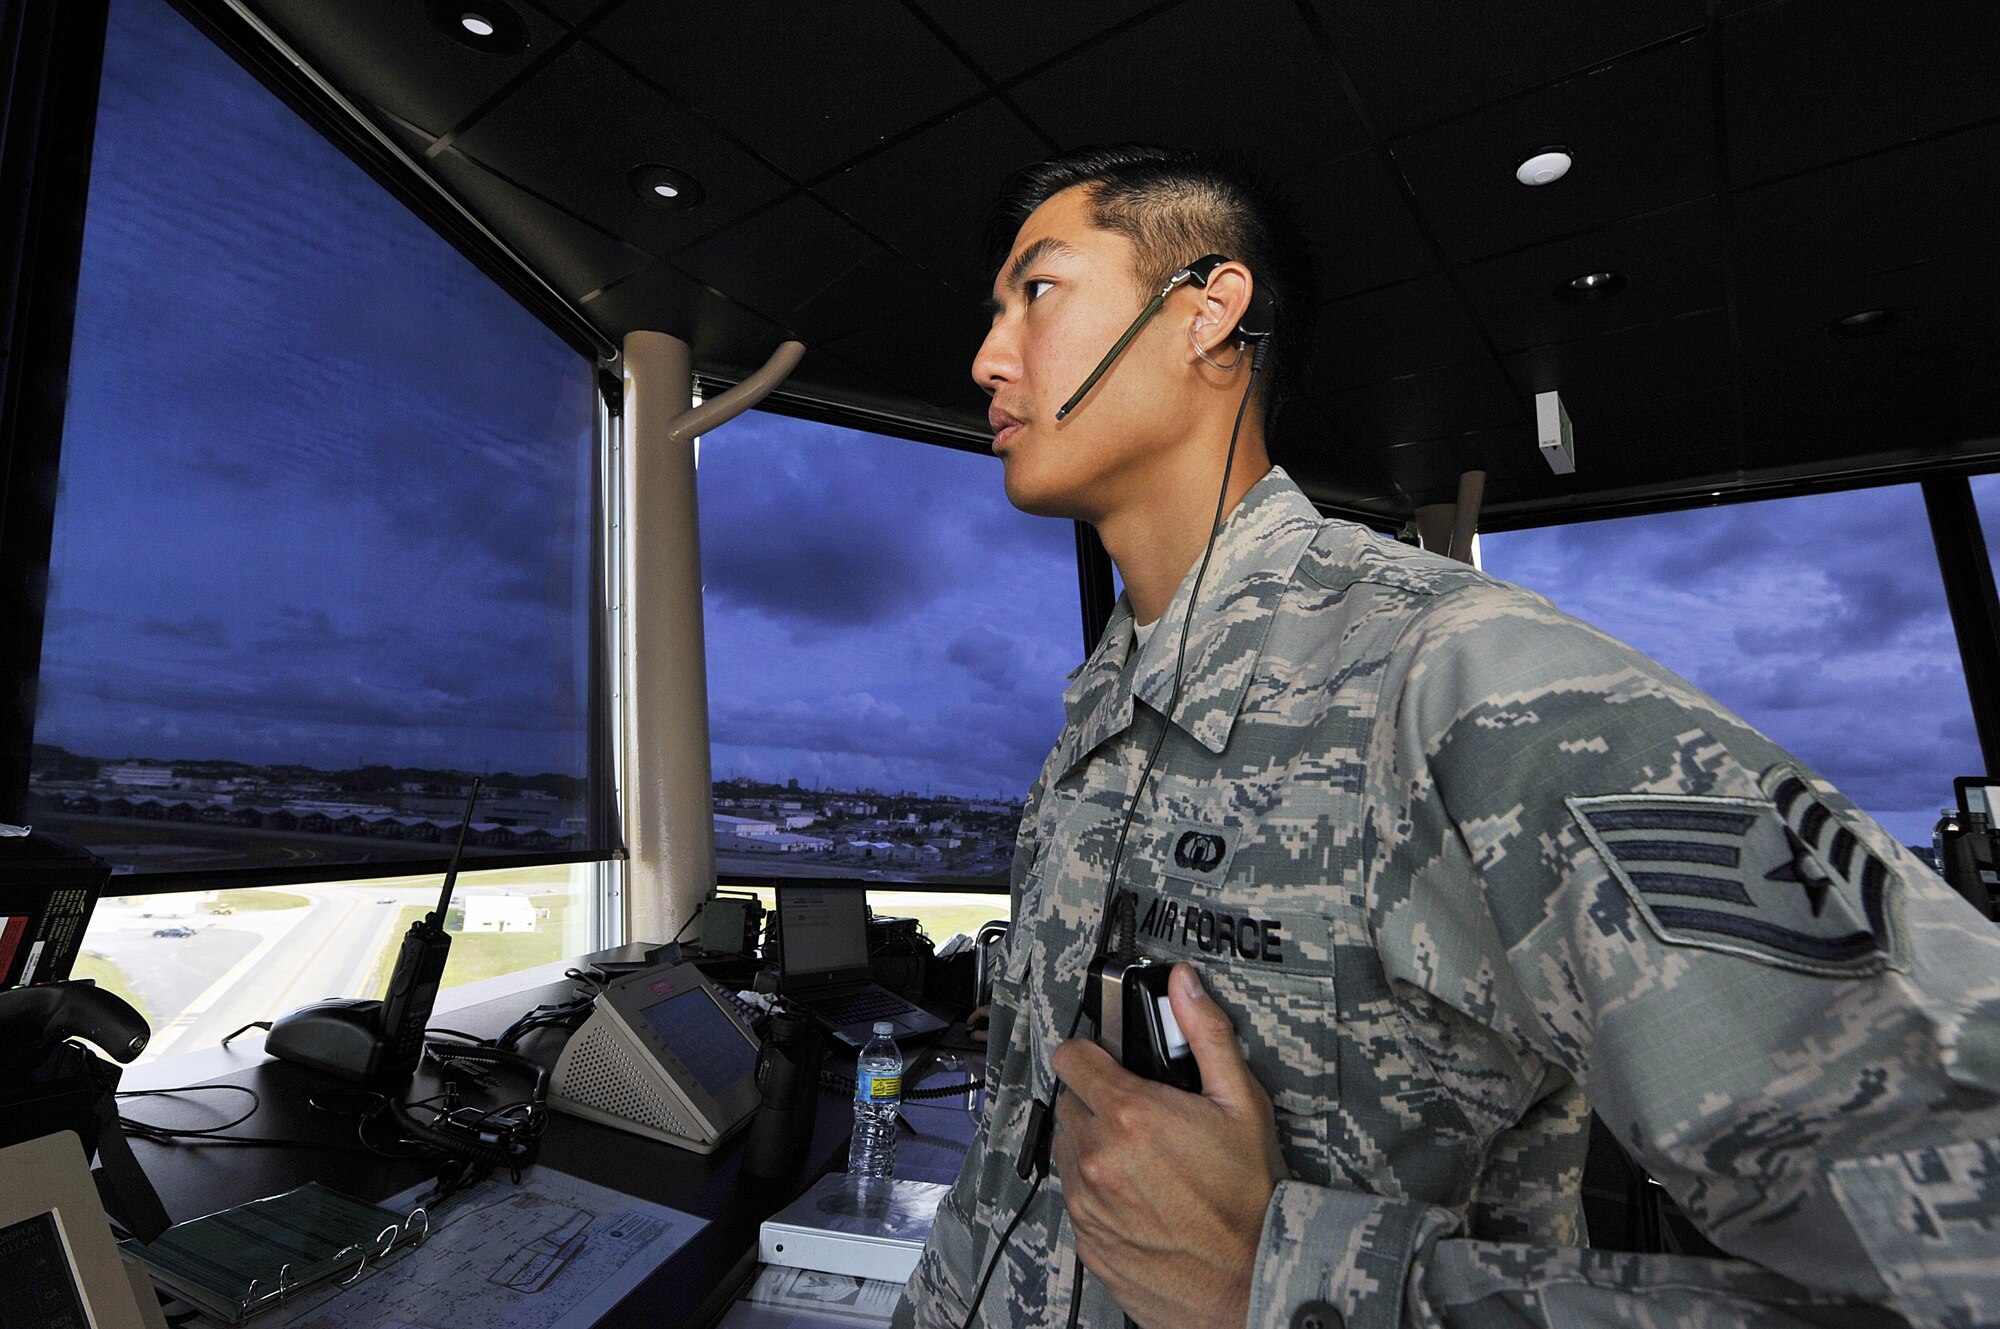 U.S. Air Force Staff Sgt. Jesse Kow, 18th Operations Support Squadron air traffic controller, advises an F-16 Fighting Falcon pilot before takeoff, Nov. 30, 2015, at Kadena Air Base, Japan. Kadena is the largest combat wing in the Pacific with its abundance of air frames and missions. Kadena's air traffic controllers are responsible for providing air traffic control and operations at one of the busiest airfields in the Air Force. (U.S. Air Force photo by Naoto Anazawa/Released)